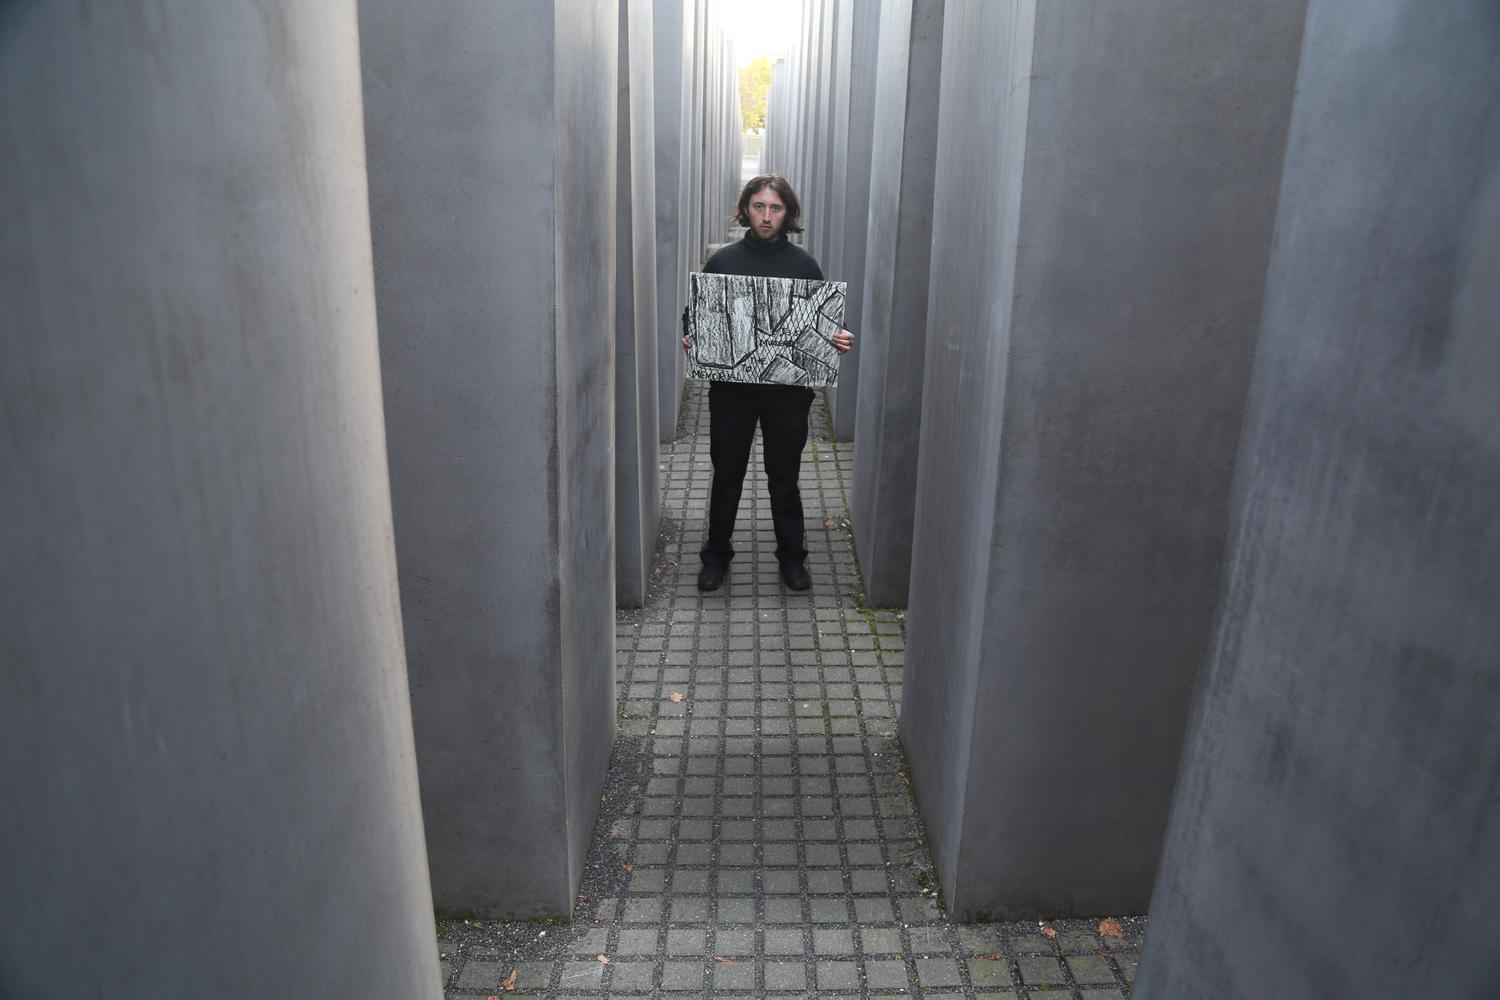 Eli with artwork in the memorial to the murdered Jews of Europe